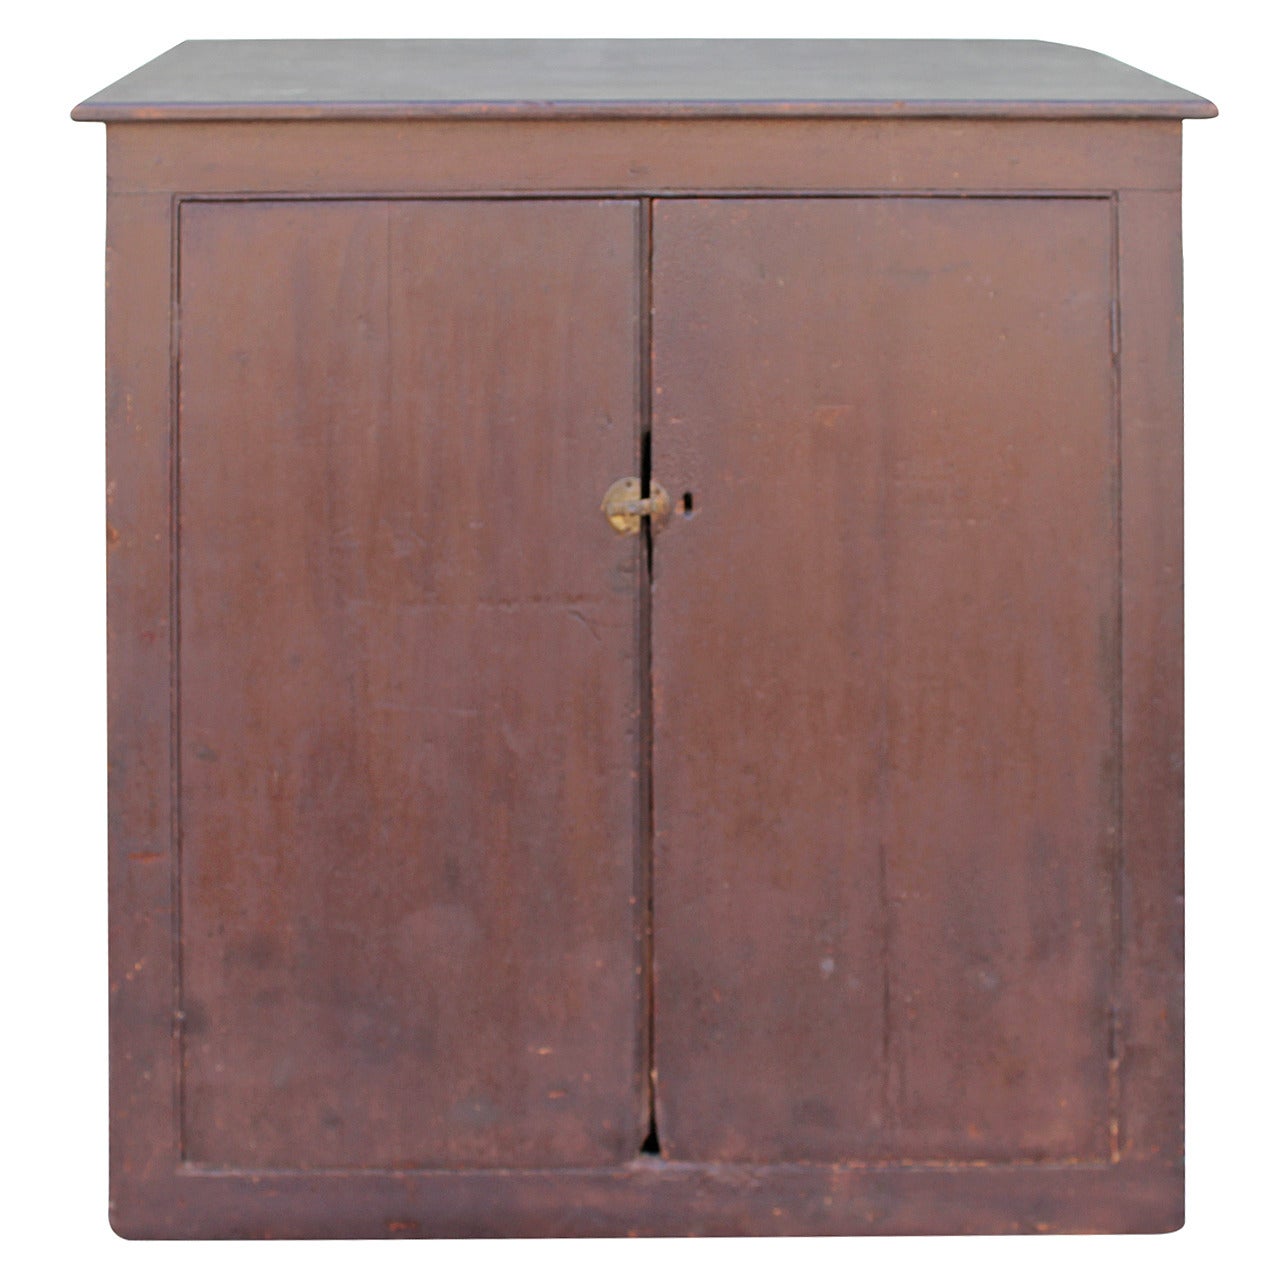 19th Century Wall Cabinet in Original Painted Brown Surface